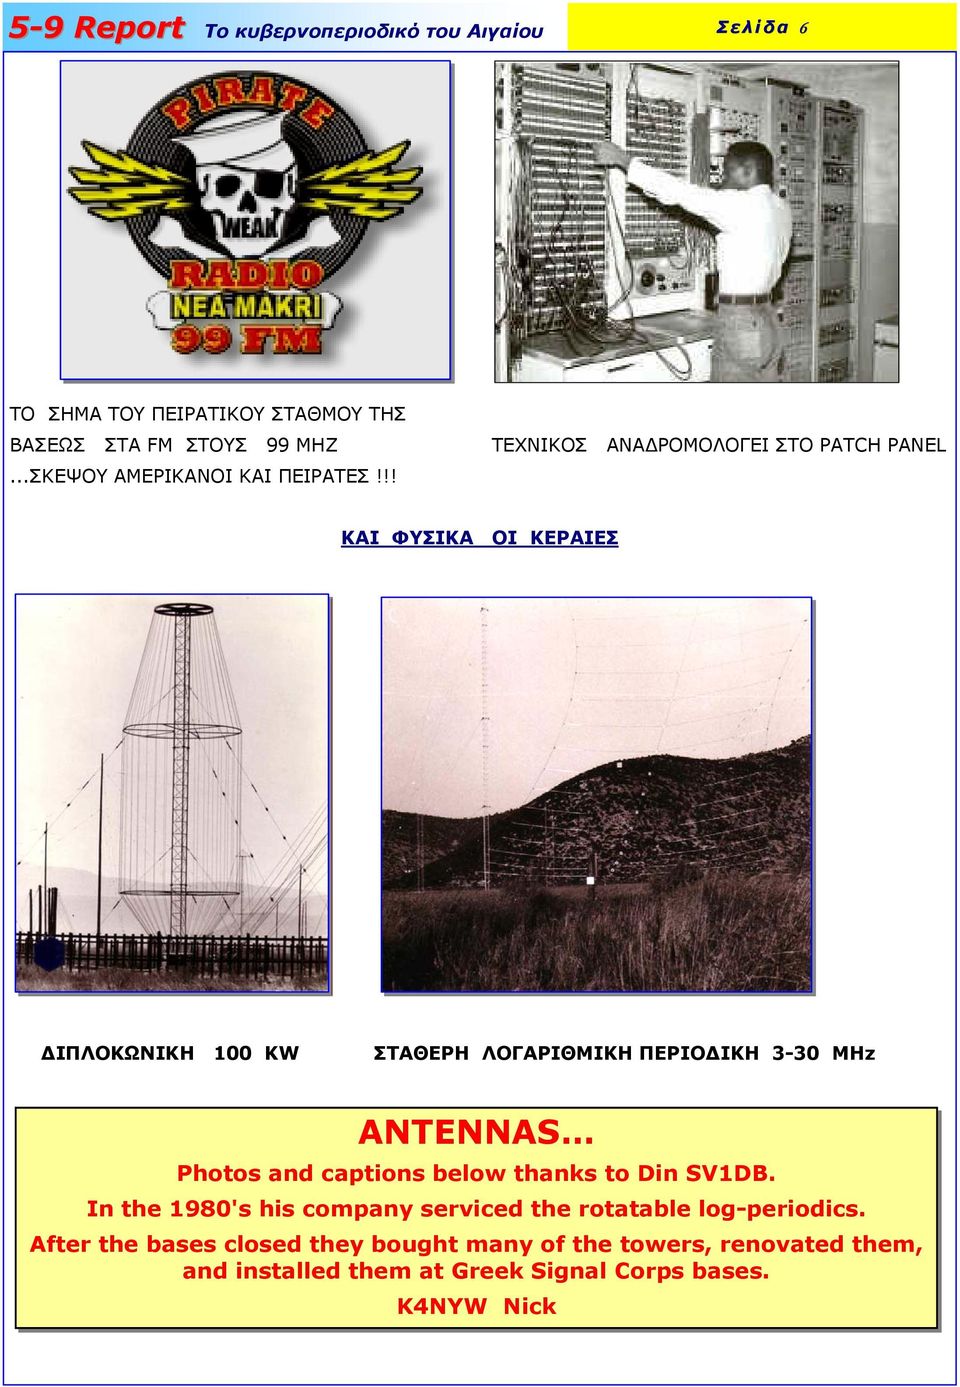 MHz ANTENNAS Photos and captions below thanks to Din SV1DB.